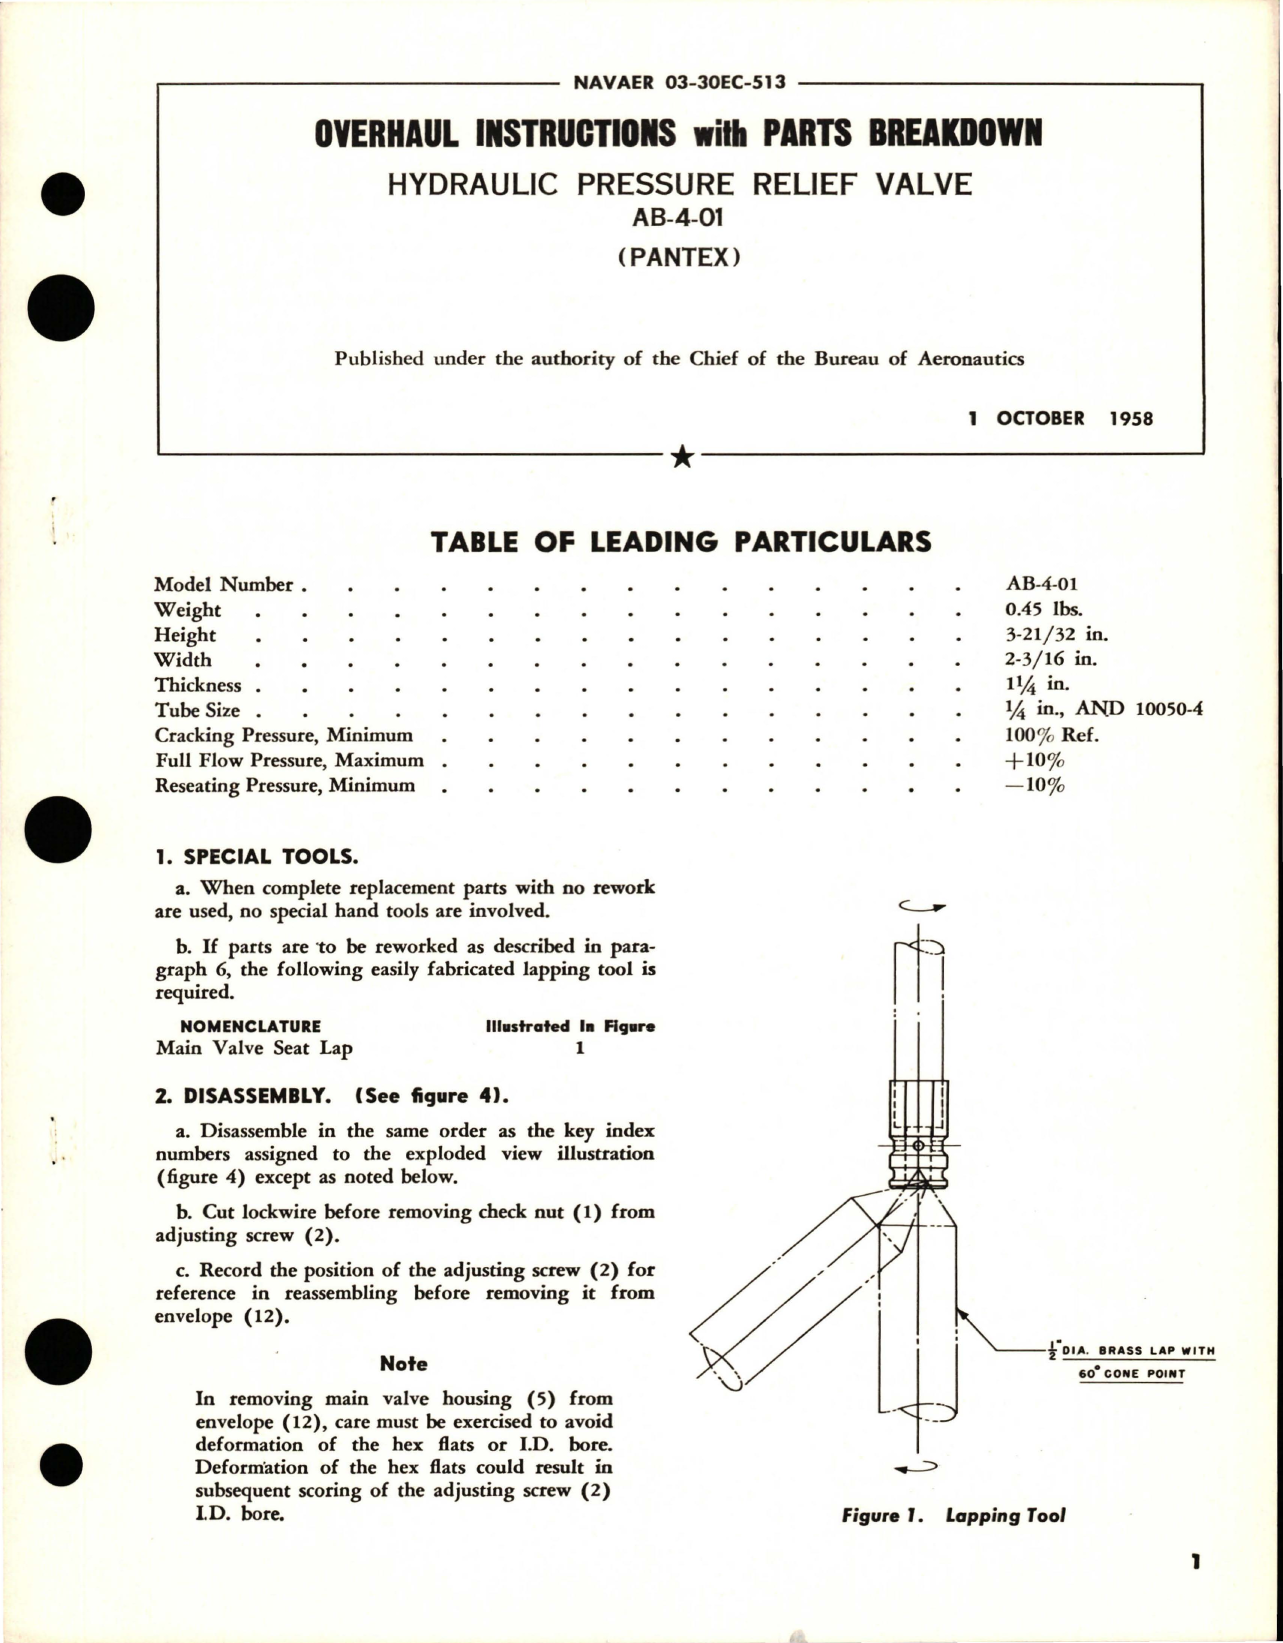 Sample page 1 from AirCorps Library document: Overhaul Instructions with Parts Breakdown for Hydraulic Pressure Relief Valve - AB-4-01